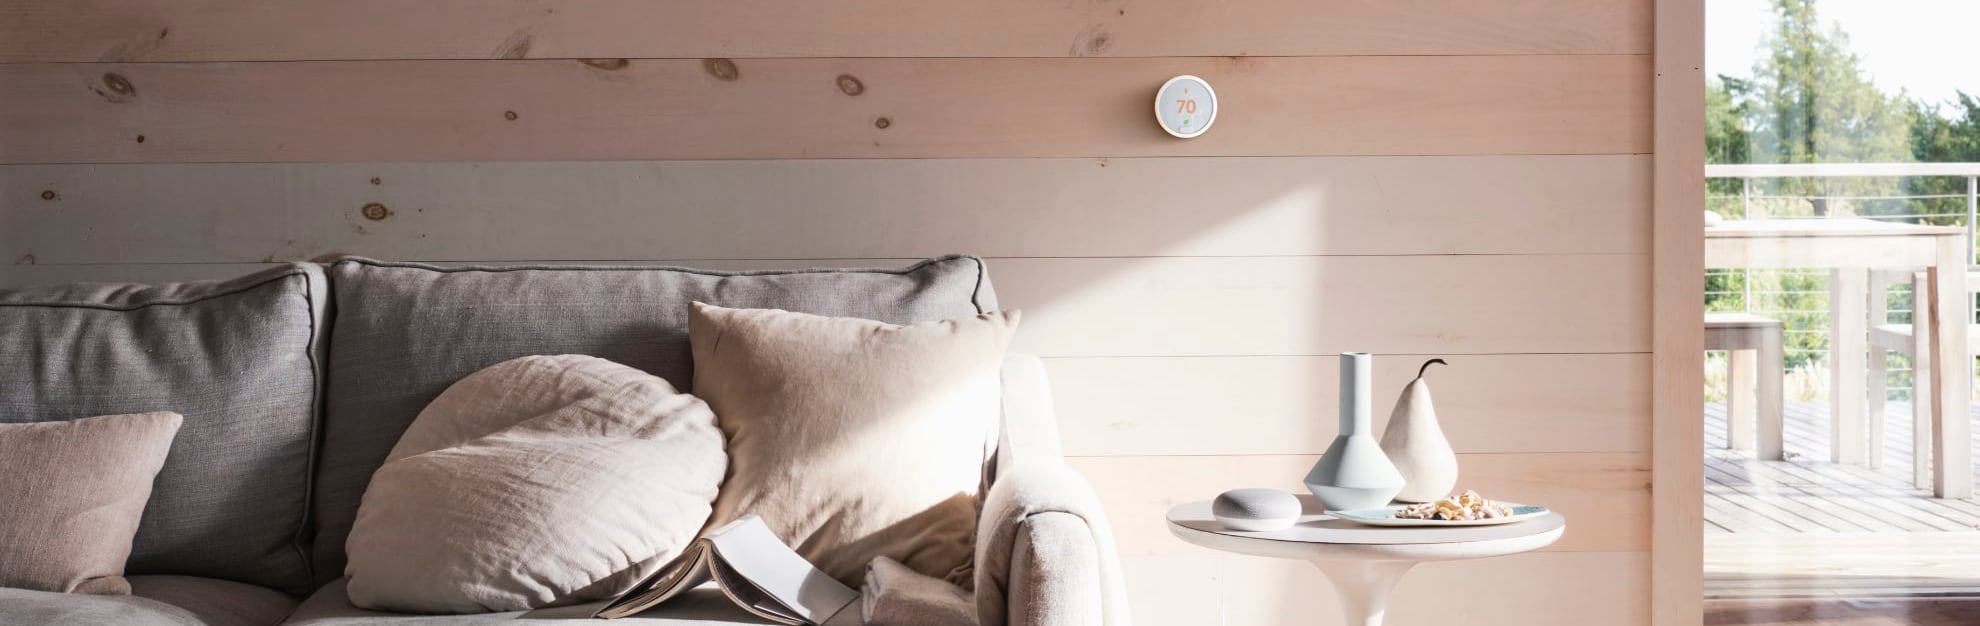 Vivint Home Automation in Wilmington